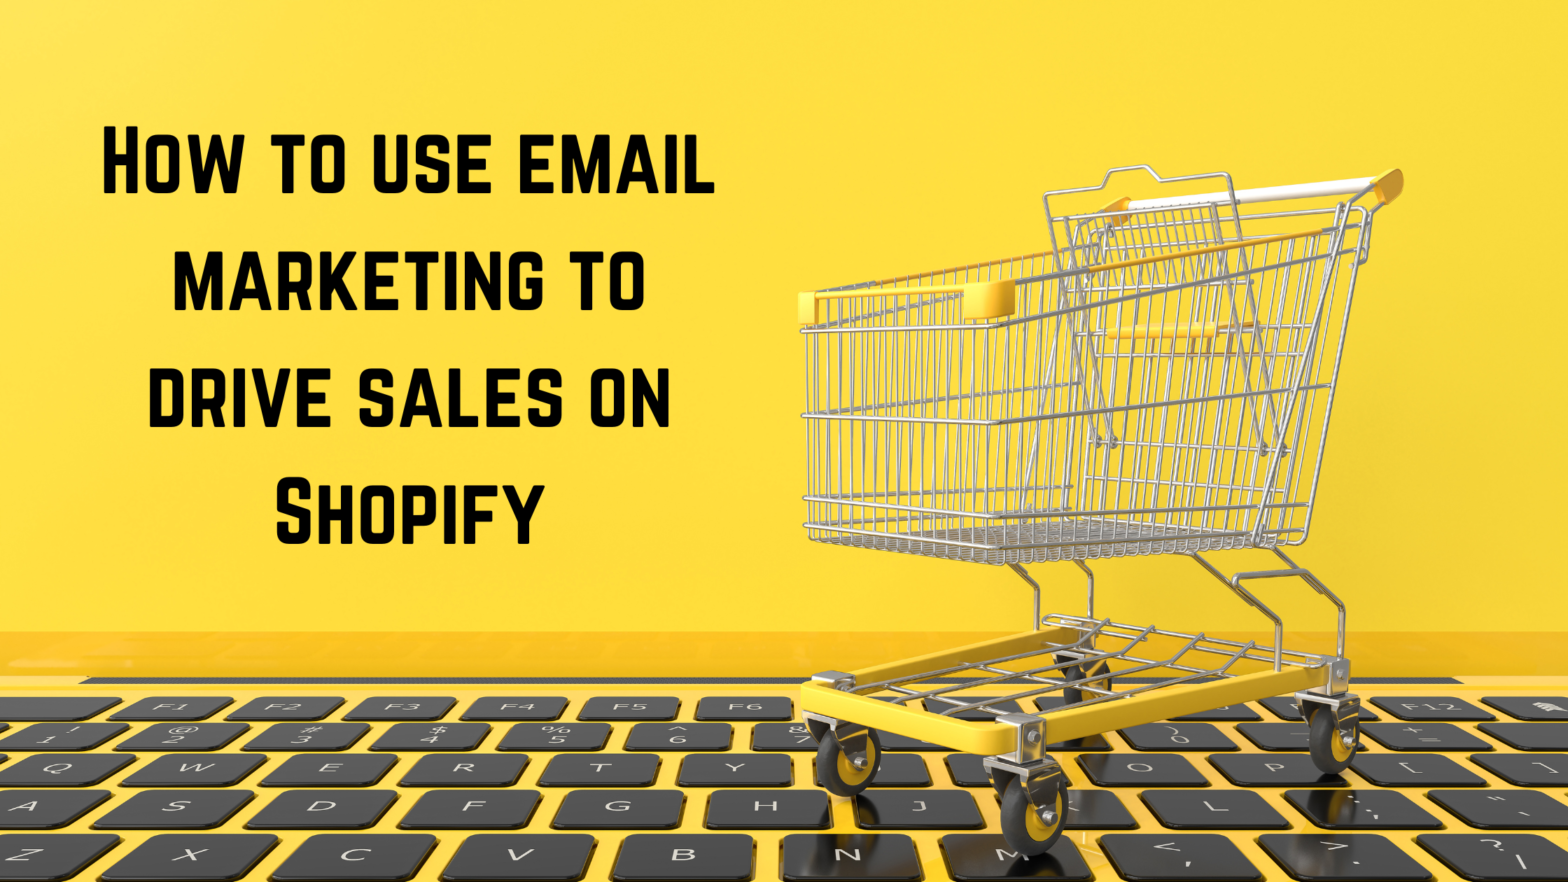 Featured Image: How To Use Email Marketing To Drive Sales On Shopify